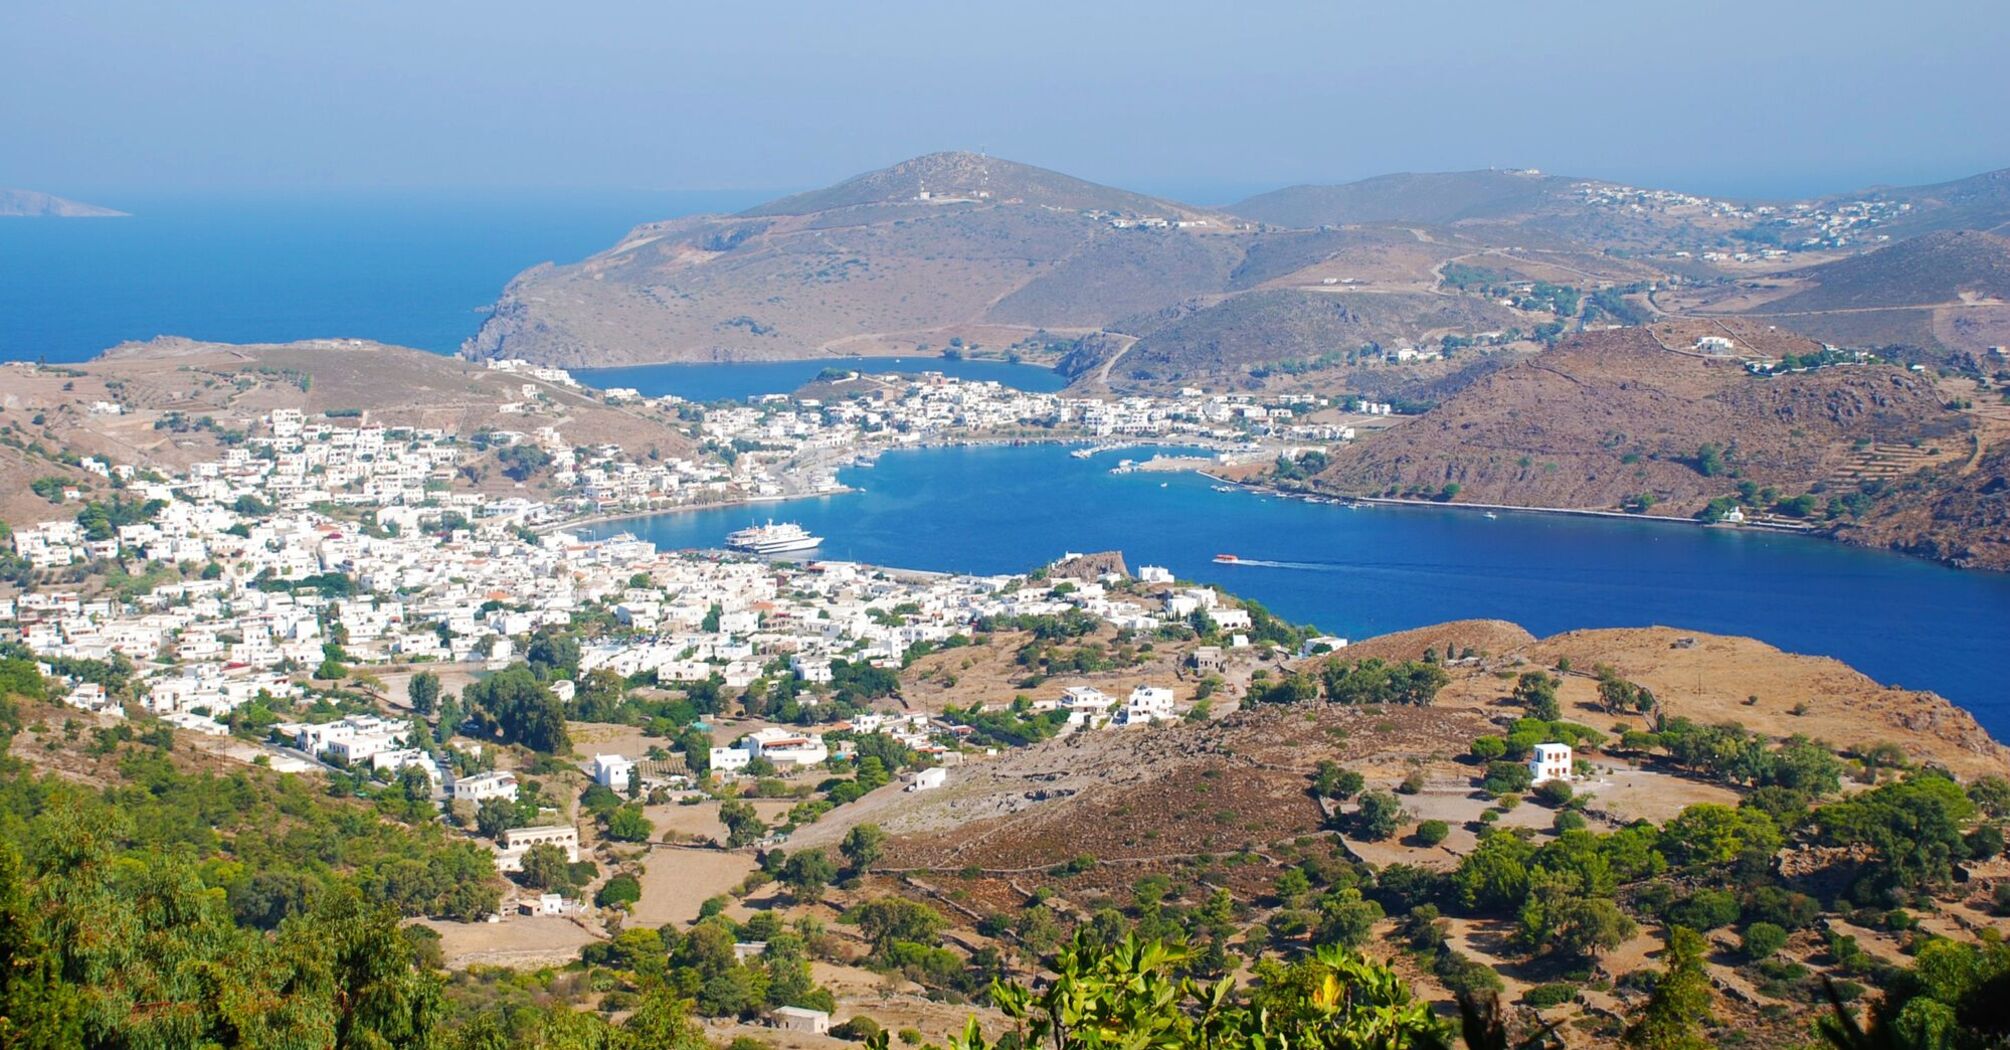 Birthplace of the Apocalypse: What the "sacred" island of Patmos hides